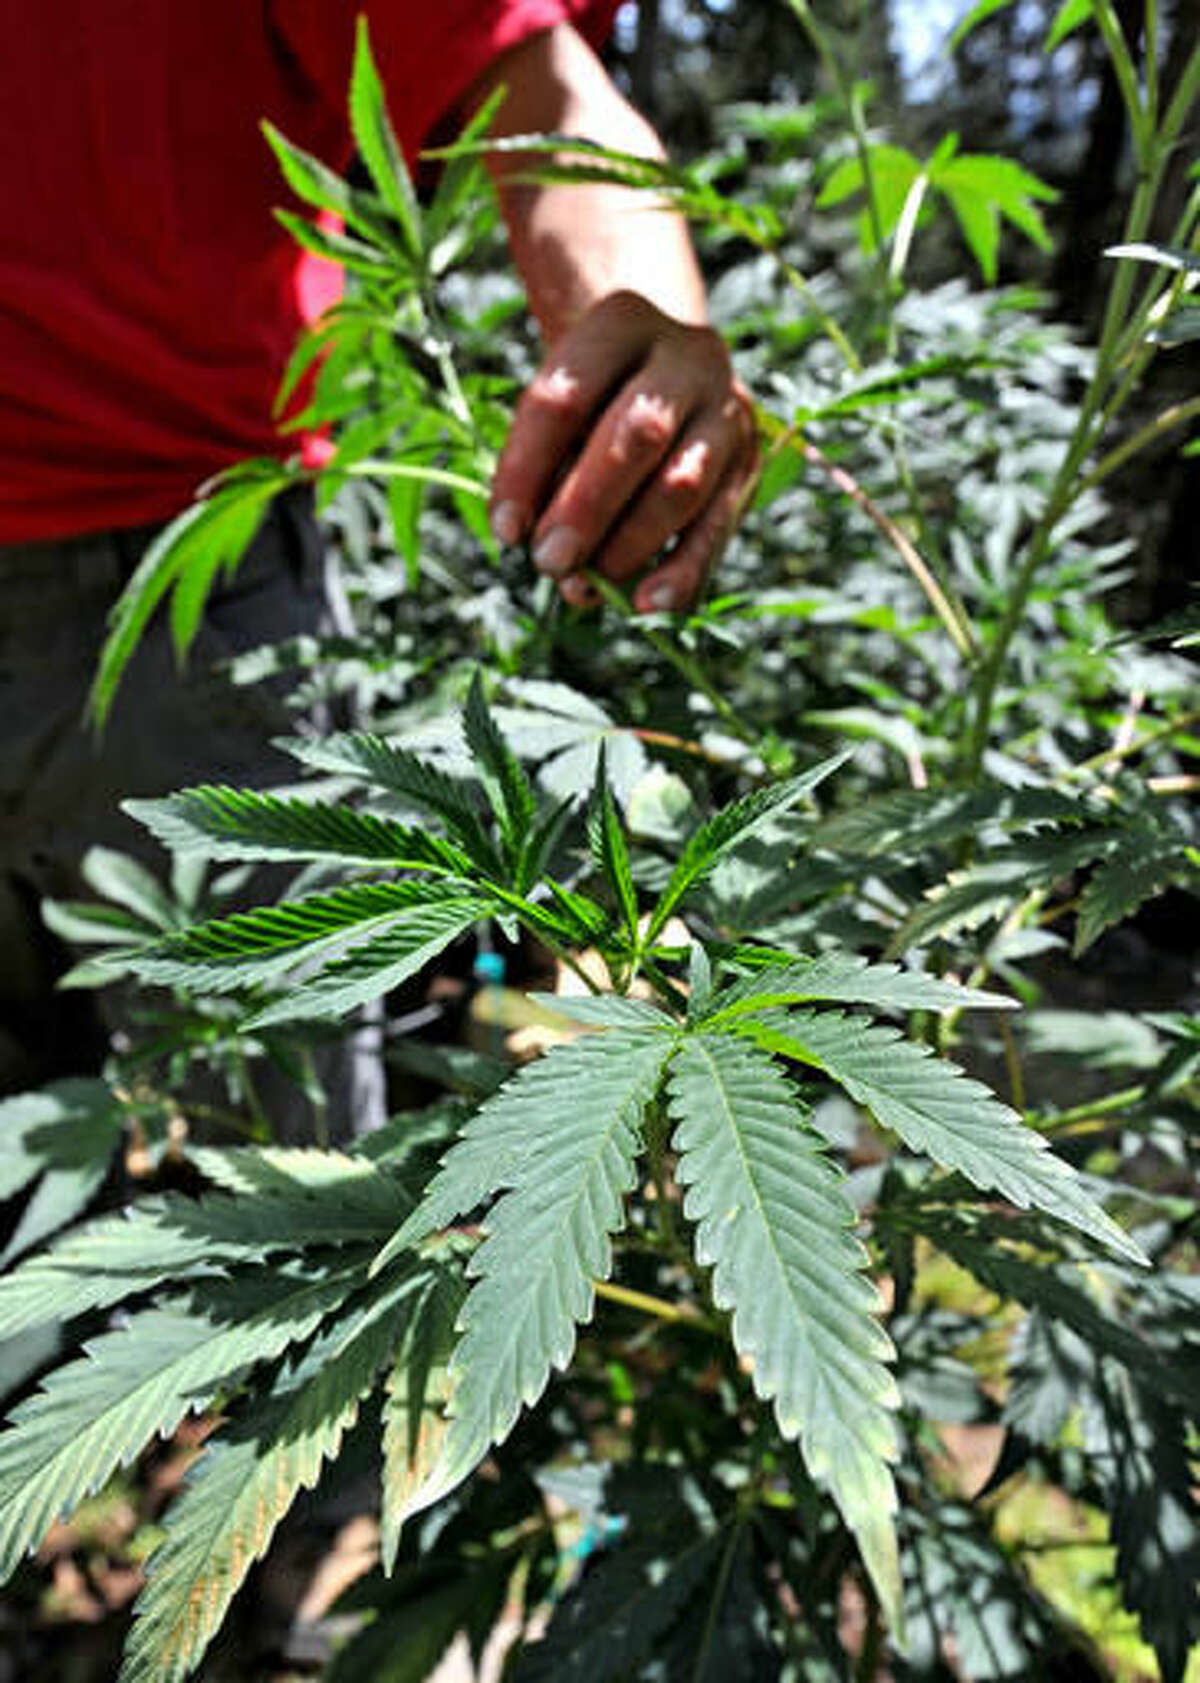 FILE--This May 11, 2016, file photo shows marijuana plants at a home near Green Springs, Ore. The Medford, Ore., City Council can't decide whether to allow outdoor marijuana grows in residential neighborhoods, so it is putting the matter before voters. (Jamie Lusch/The Medford Mail Tribune via AP, File)